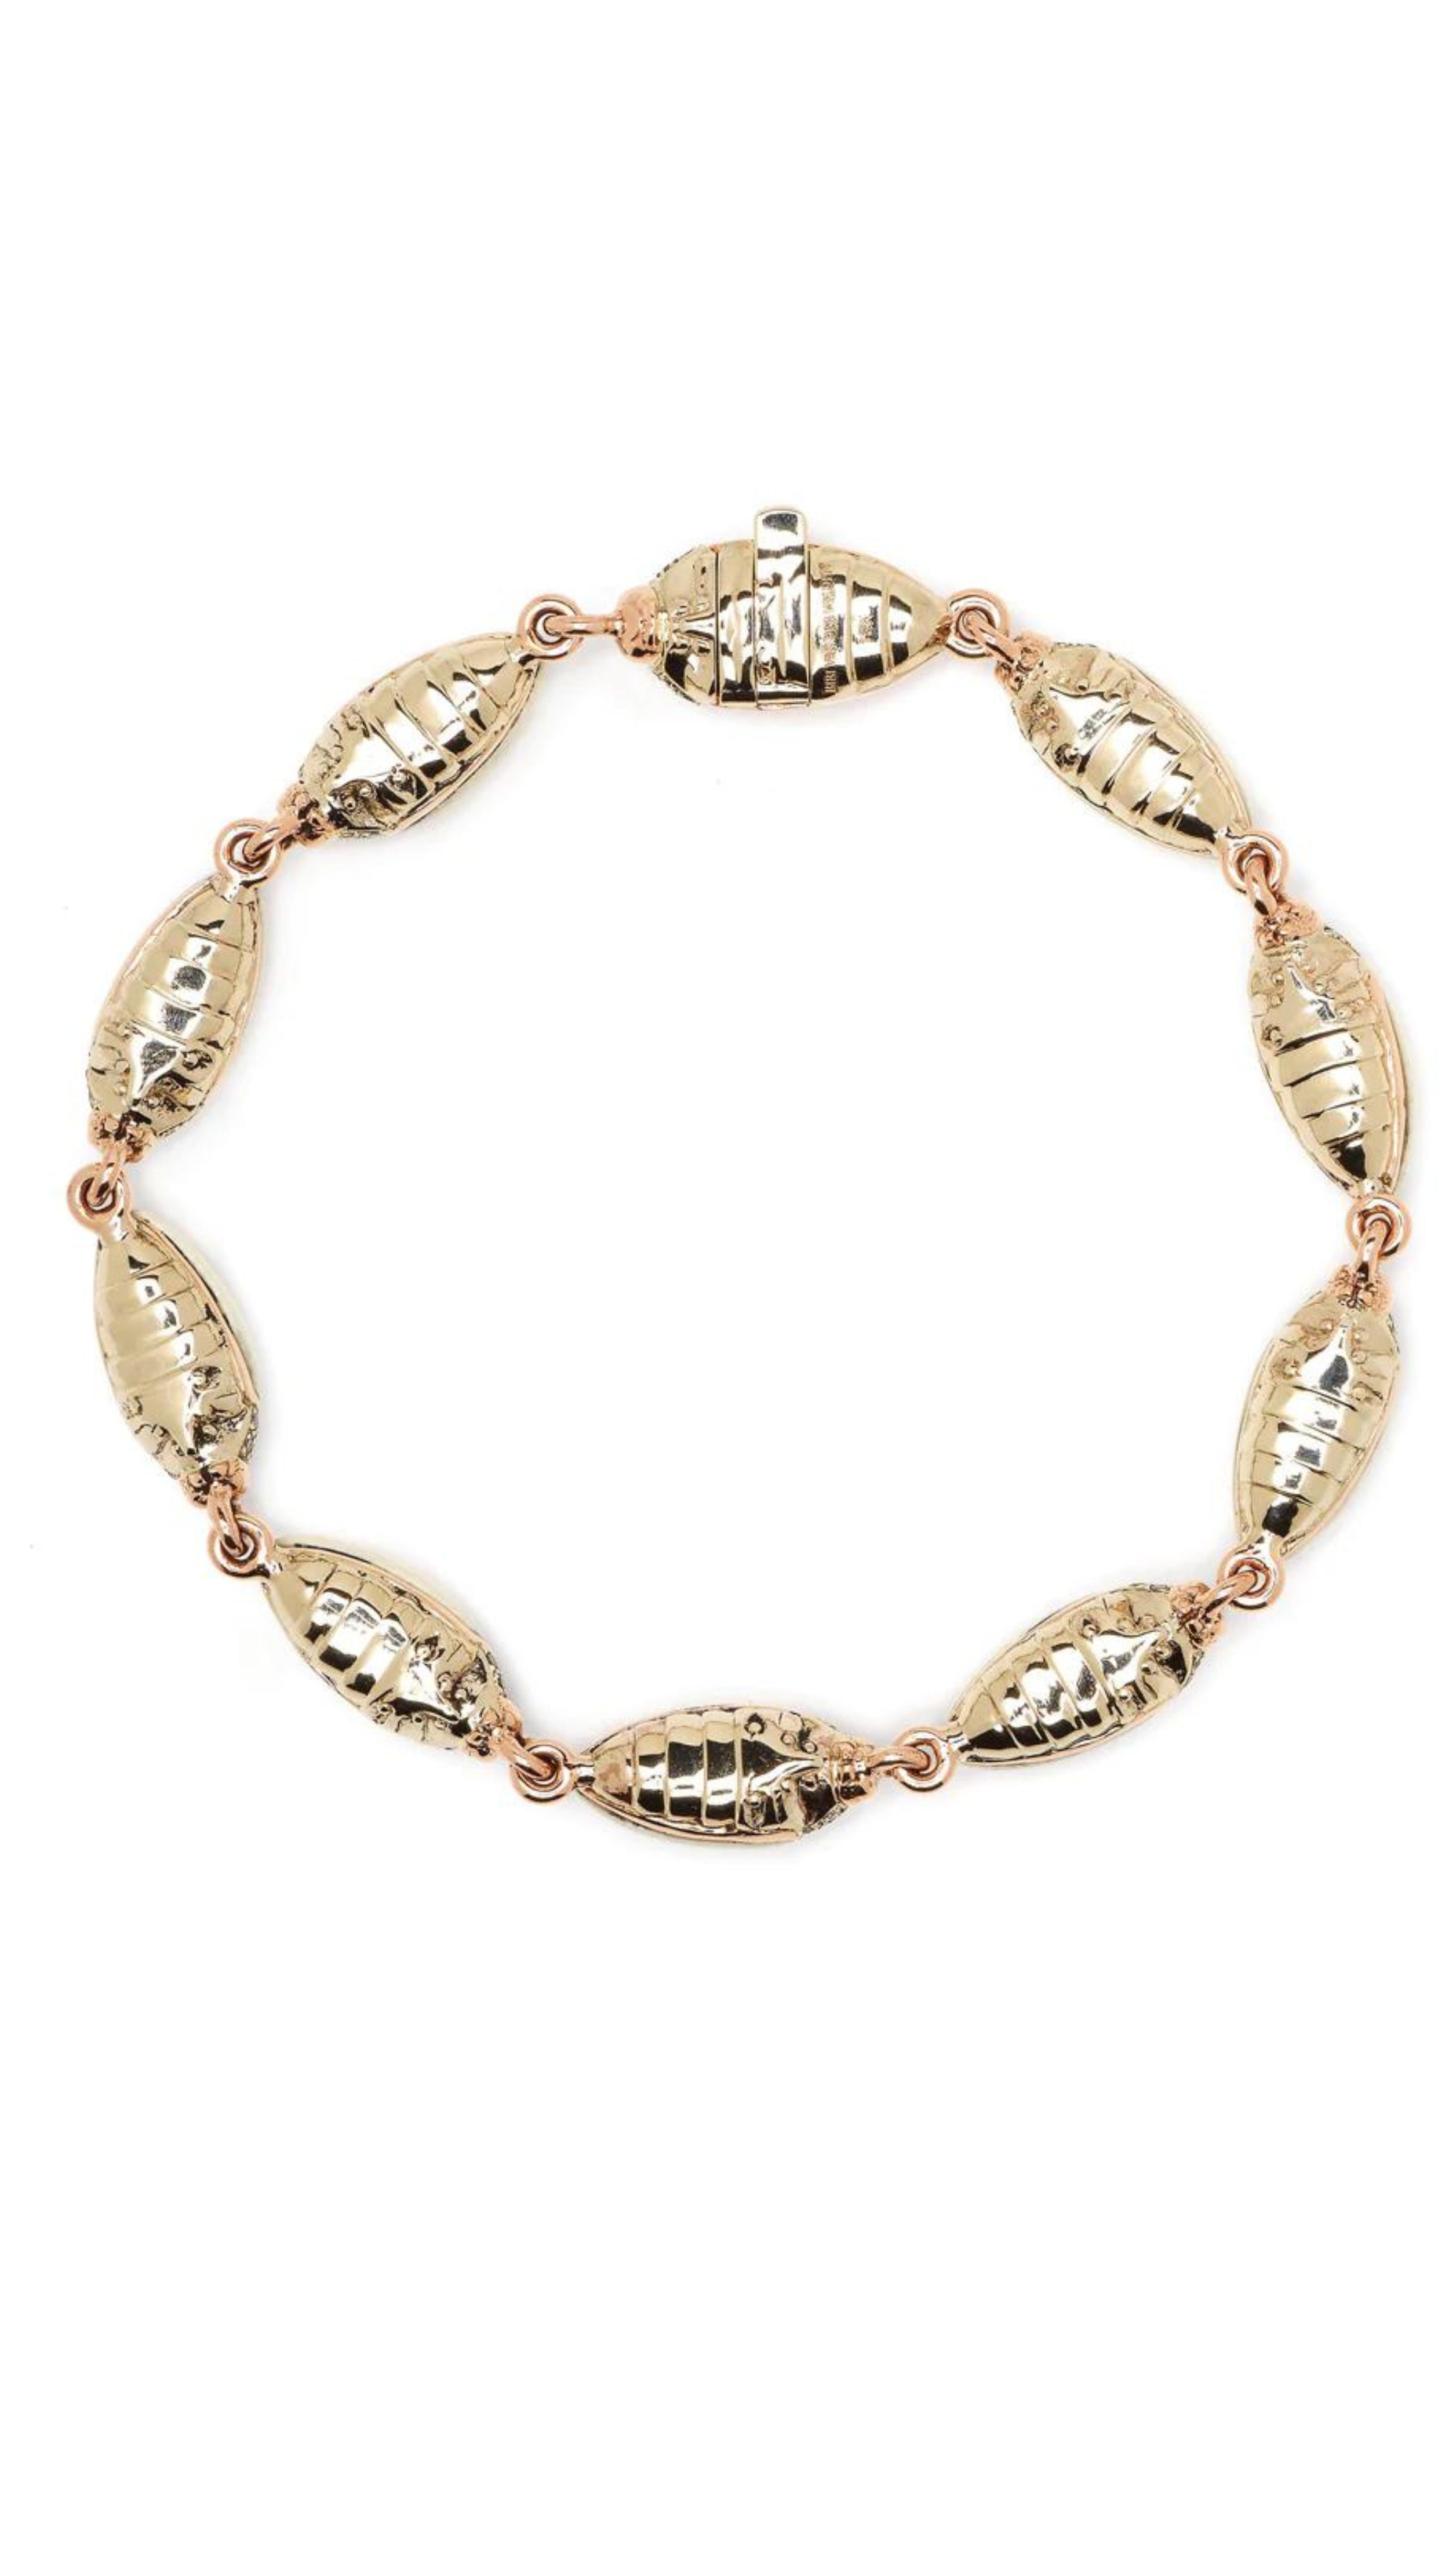 Winter Mammoth Scarab Bracelet is made from creamy tones of polished and carved mammoth tusk, 18k yellow gold, 925 sterling silver, and brown diamonds. Individual scarabs are linked together. Shown from the back.